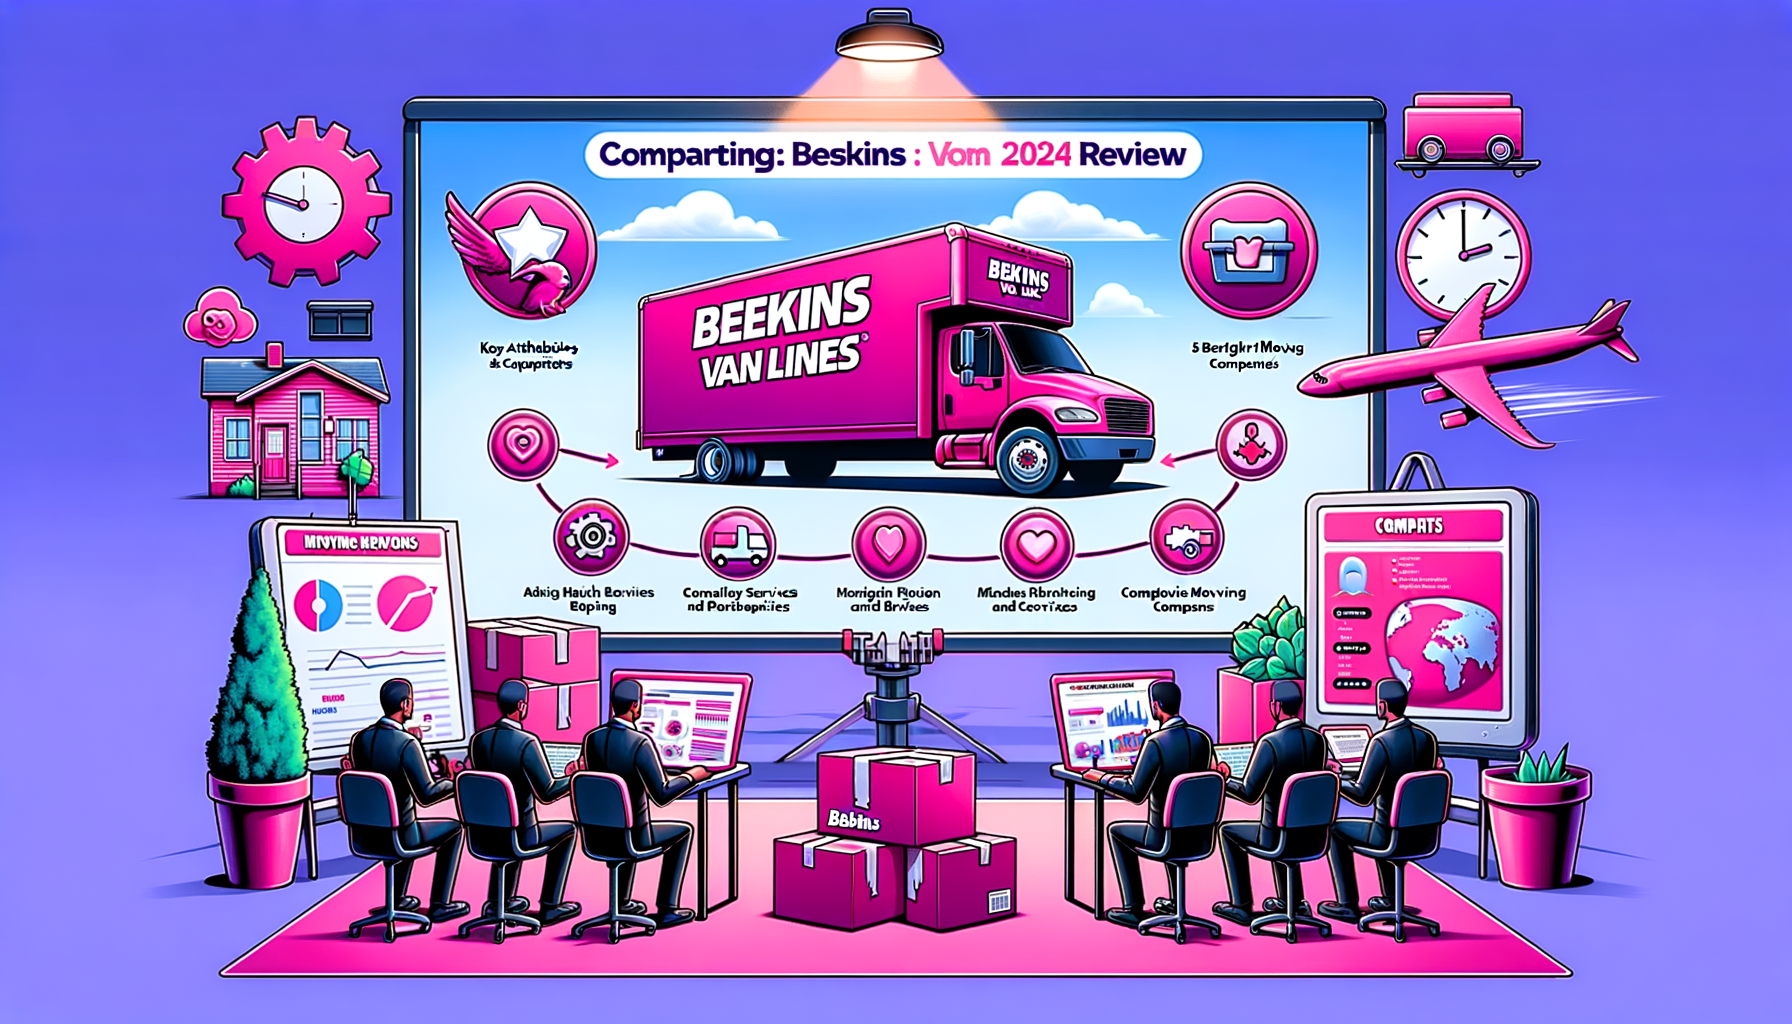 Cartoon illustration comparing Bekins Van Lines and competitors in fuschia tones, highlighting key features and services for a 2024 moving company review.